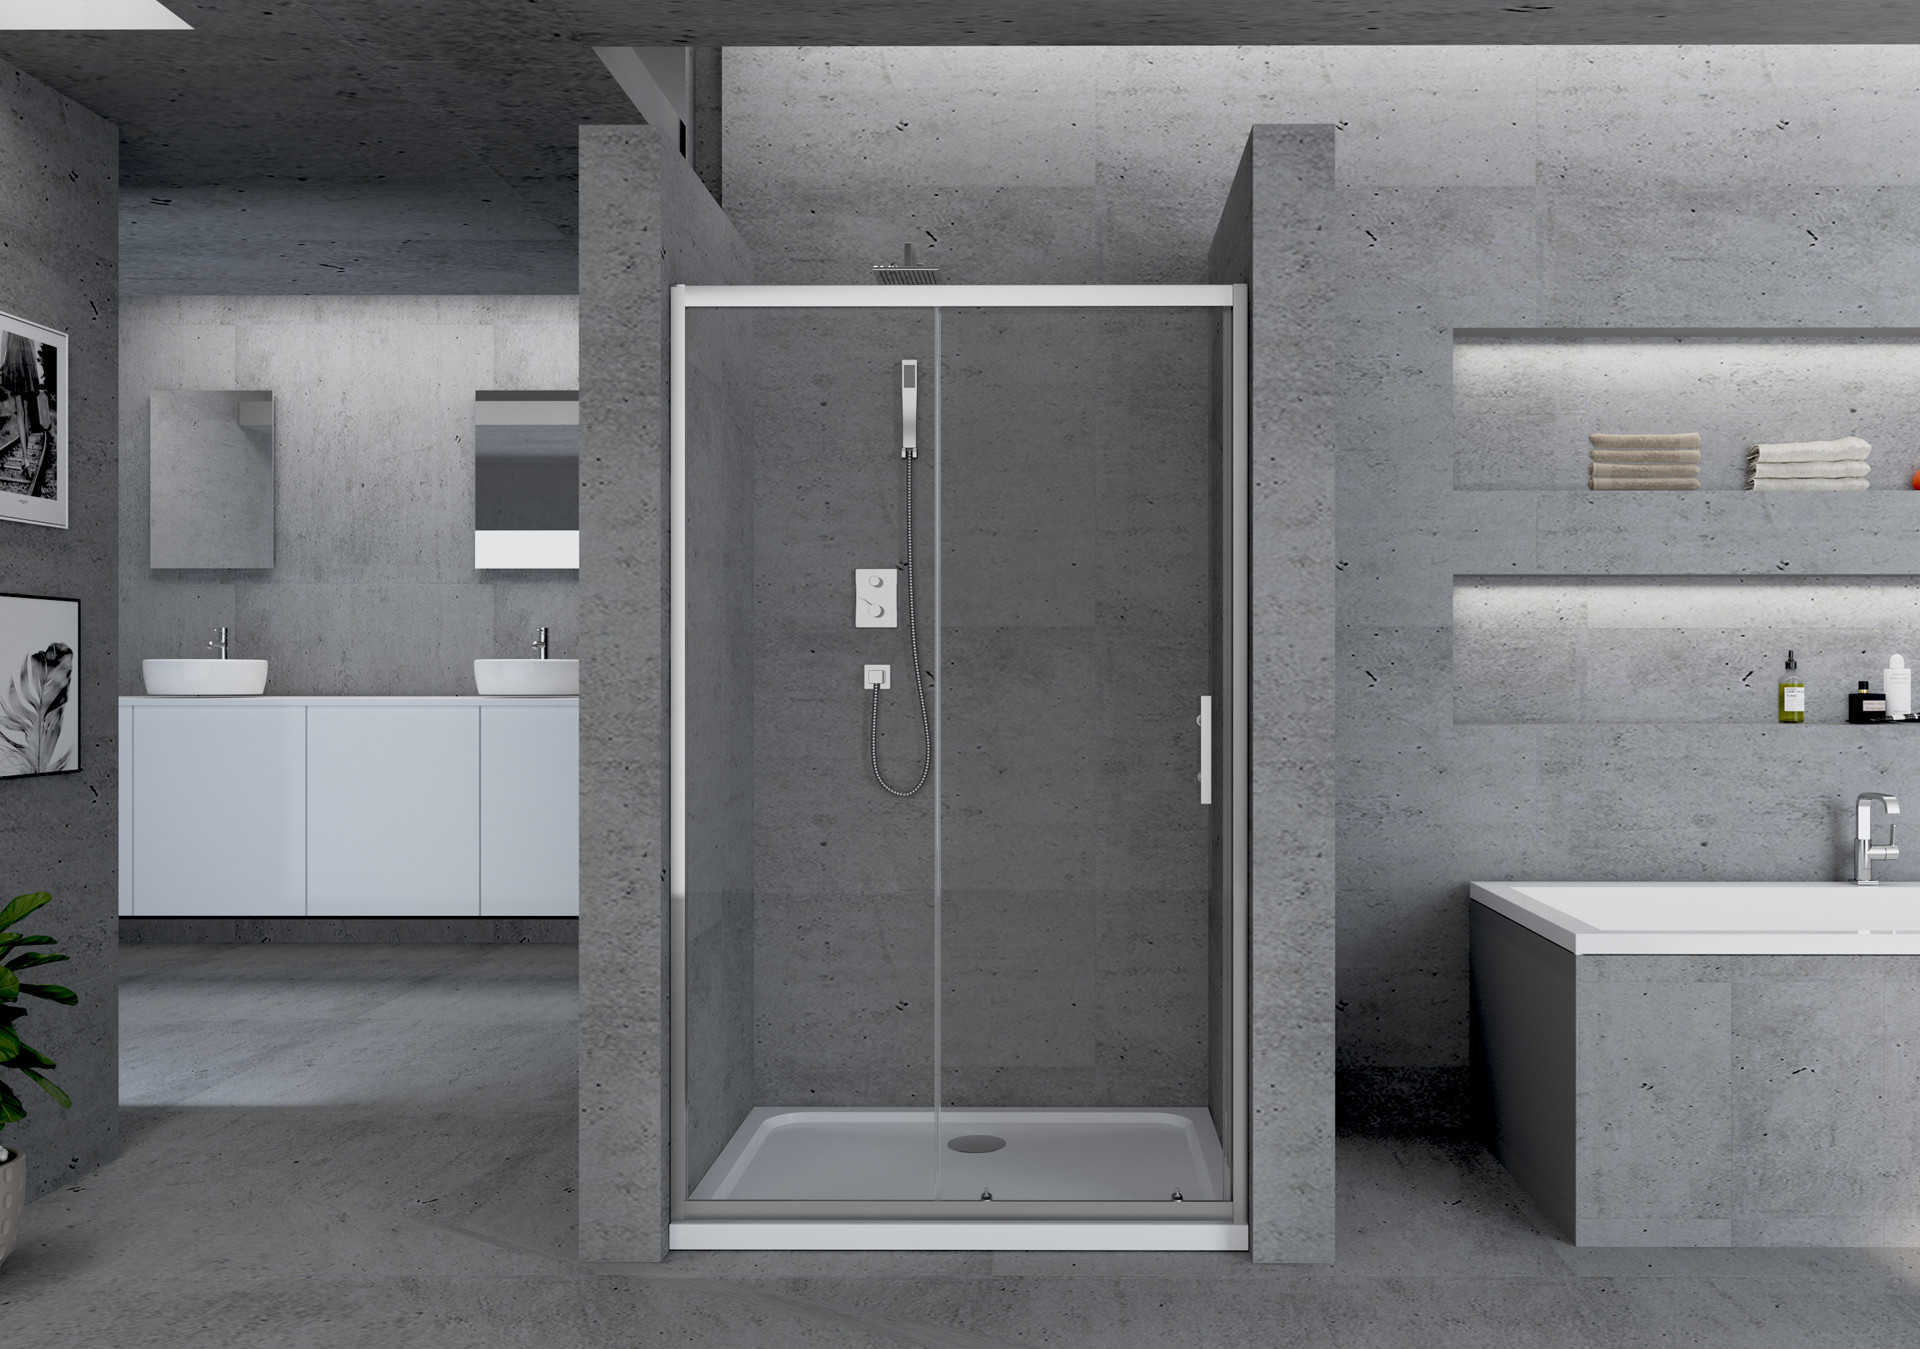 Some of the features that a full-framed sliding shower door may have are